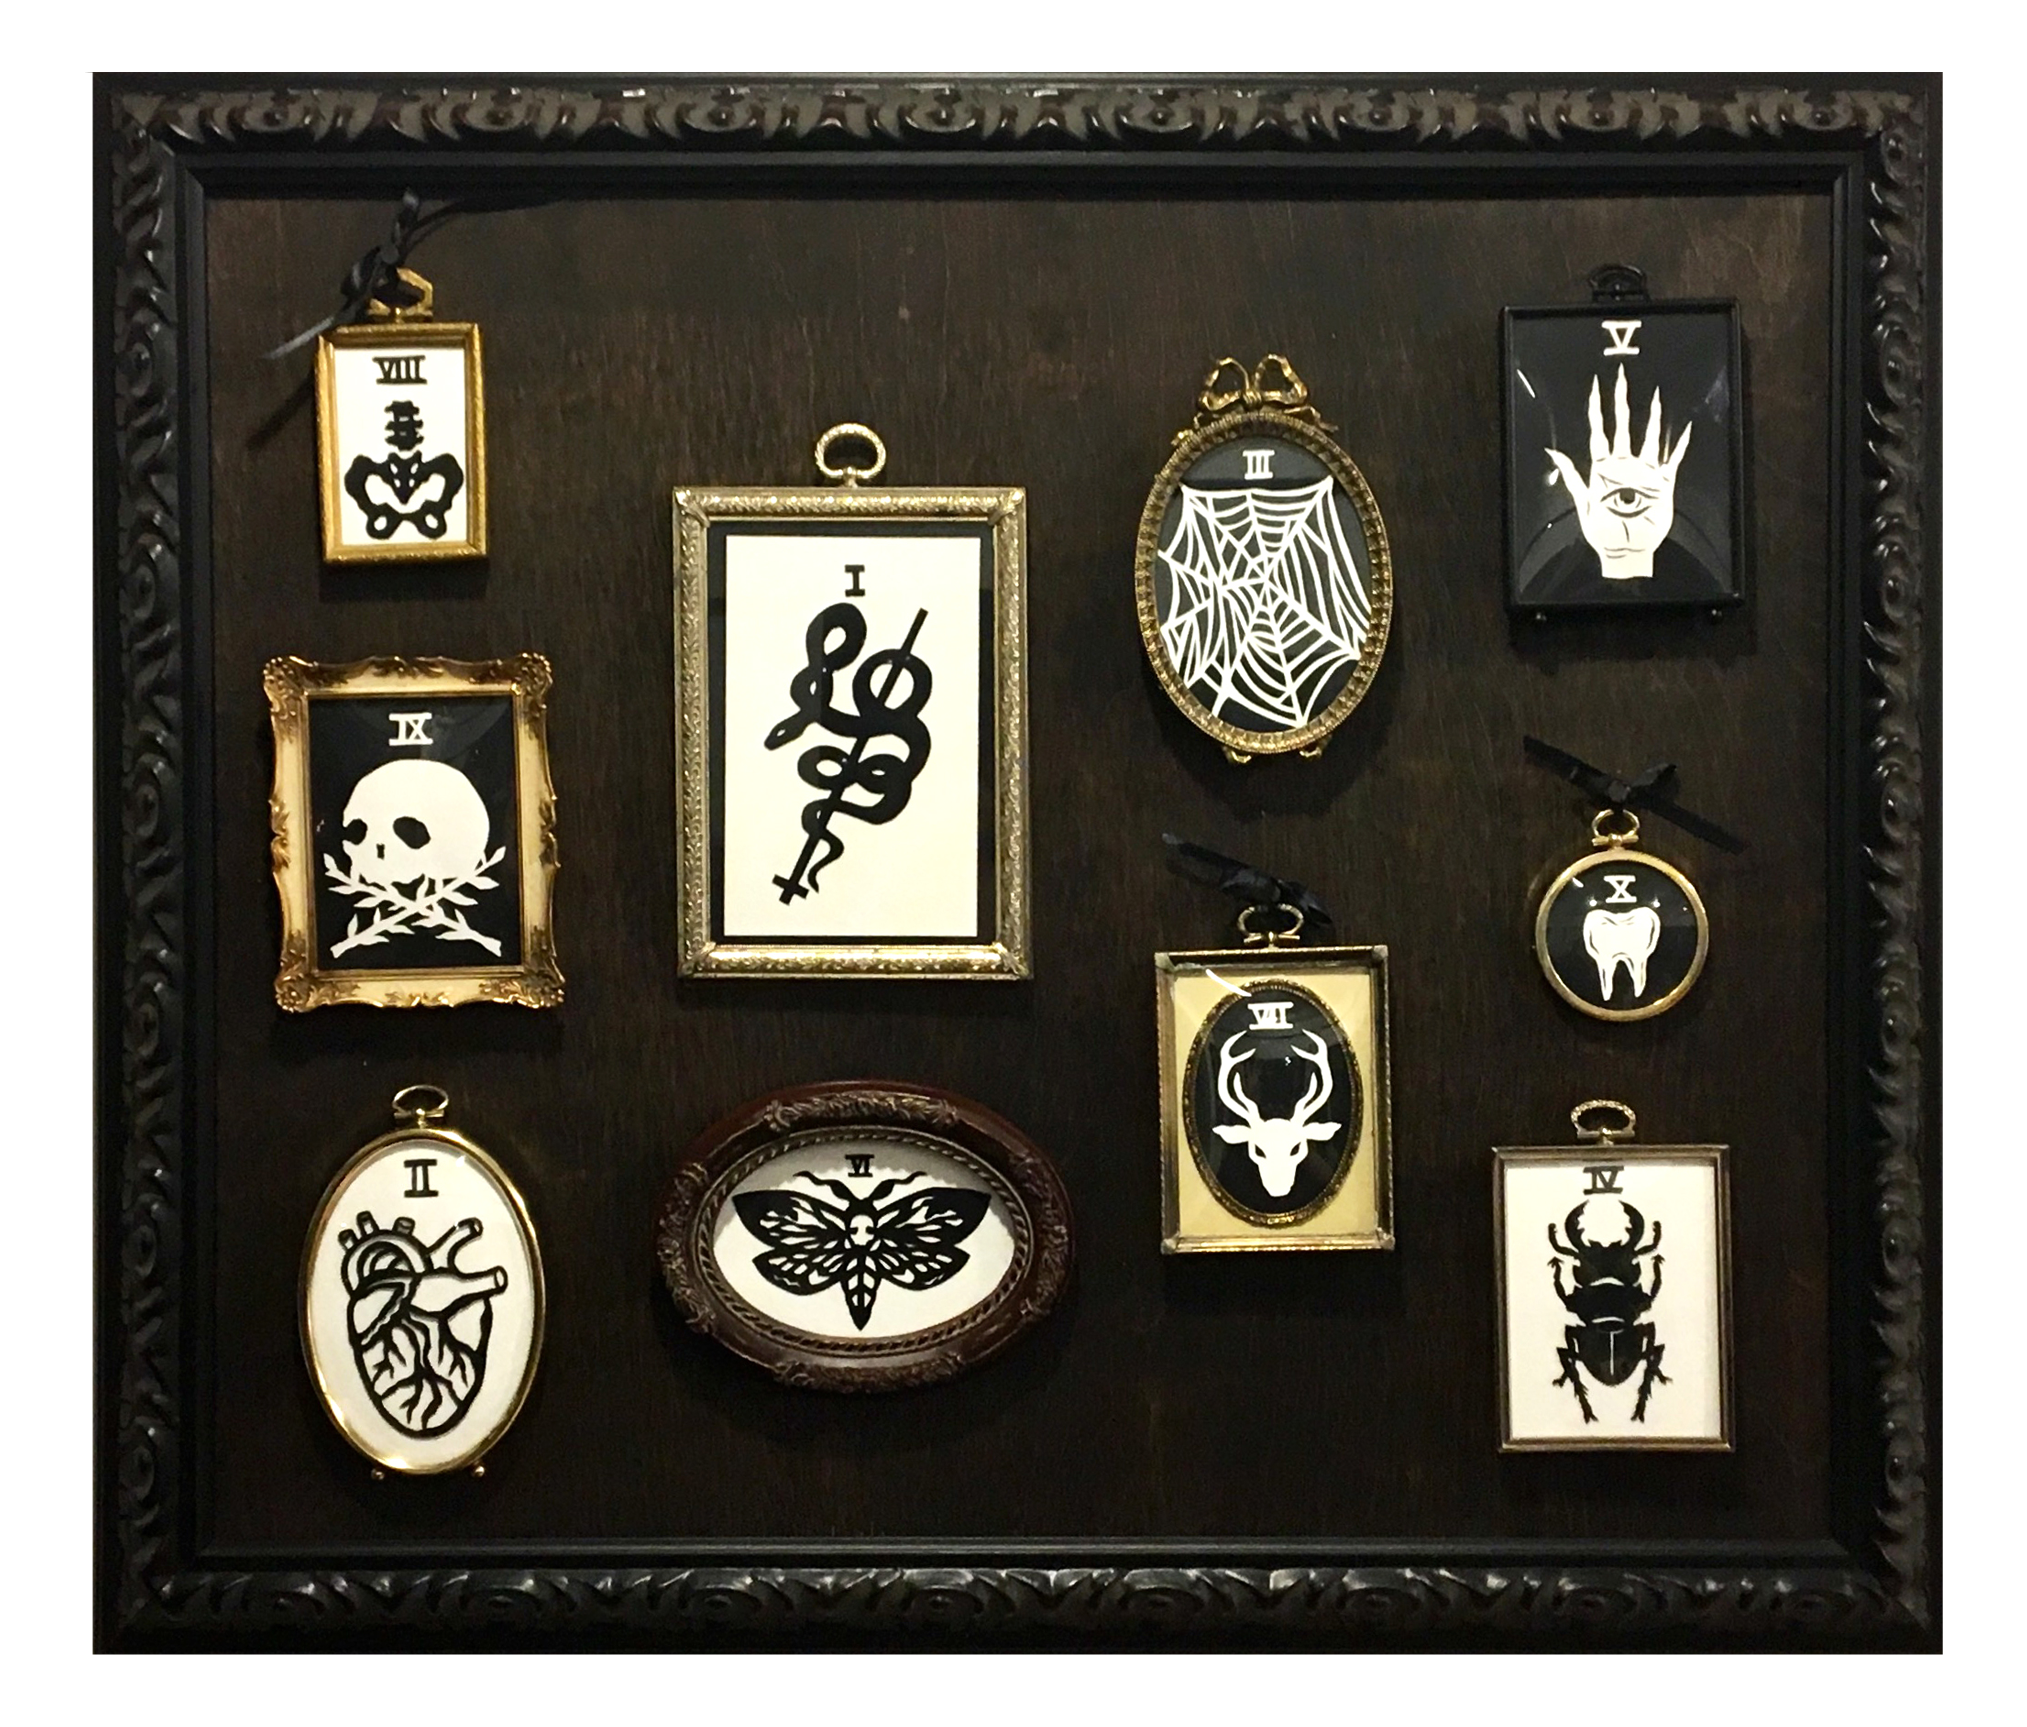   THE RELIQUARY  Hand cut paper 